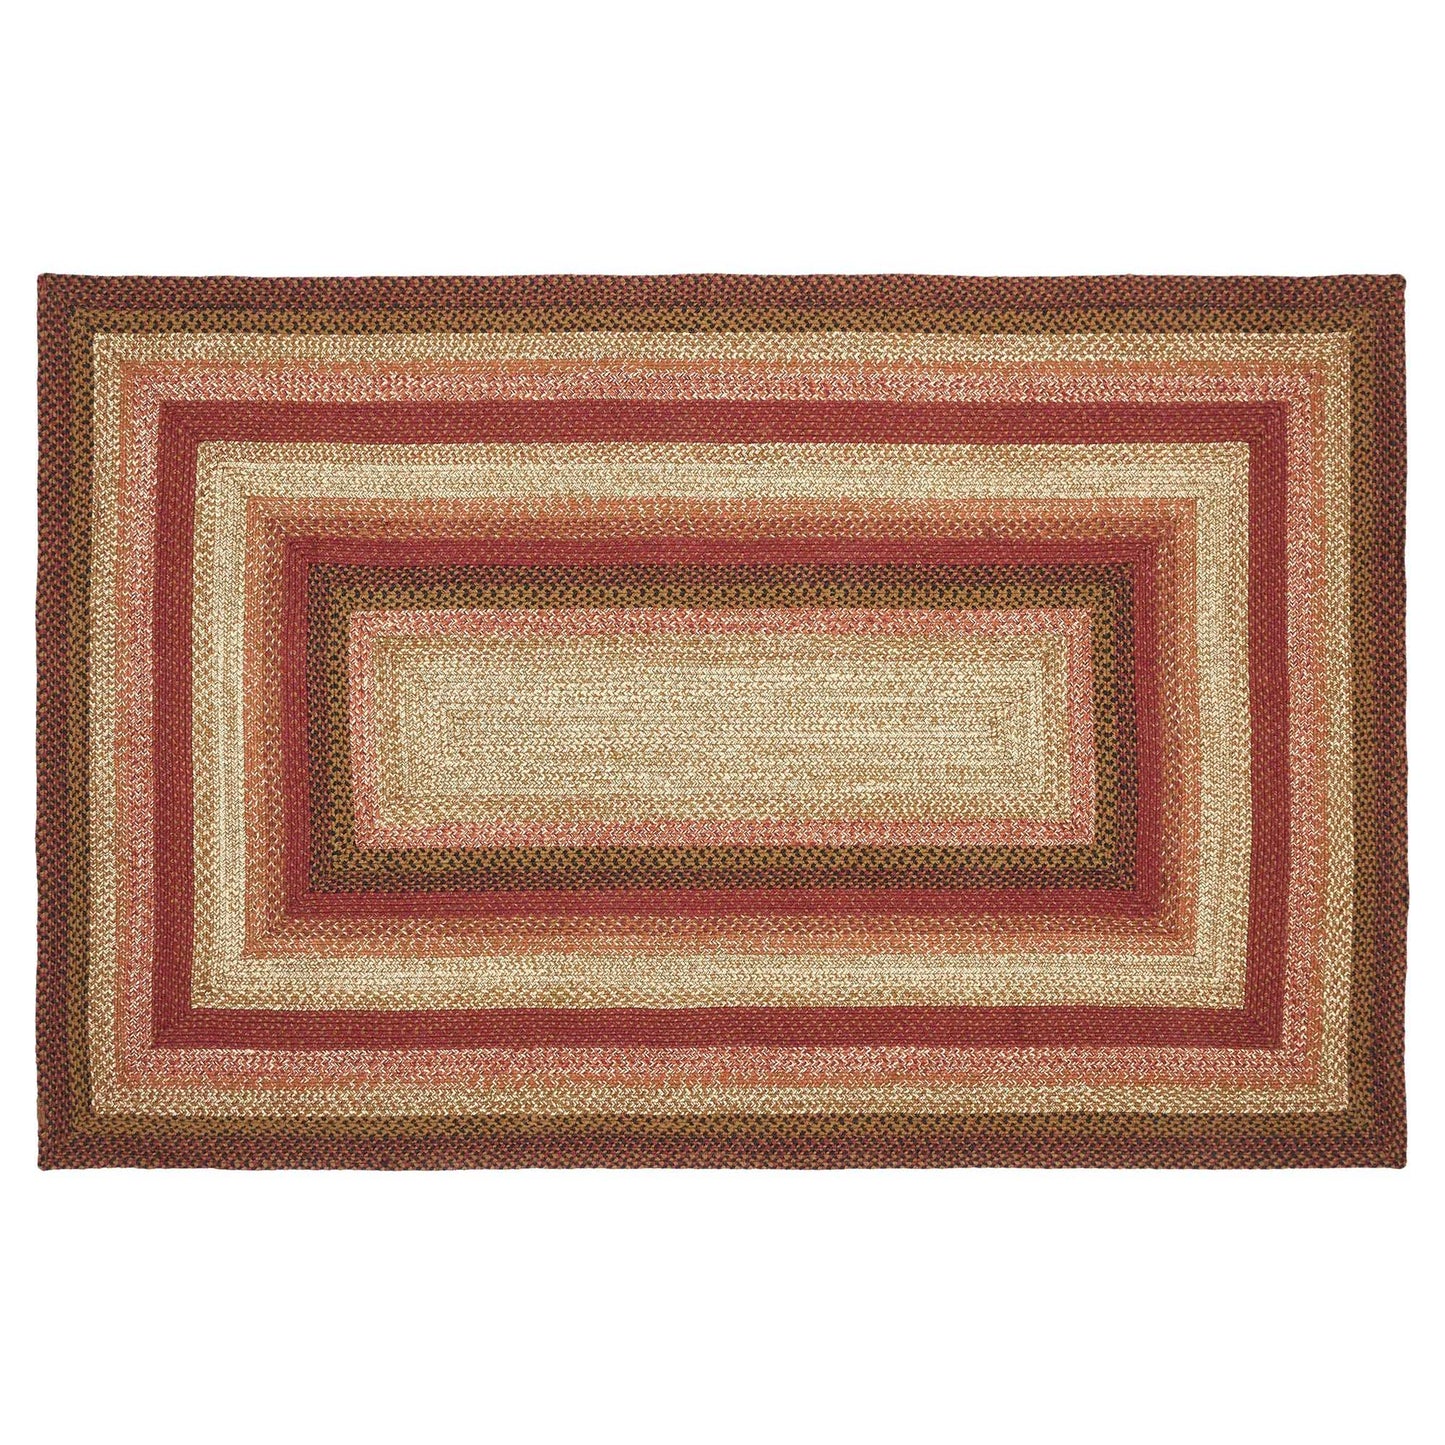 67121-Ginger-Spice-Jute-Rug-Rect-w-Pad-60x96-image-5